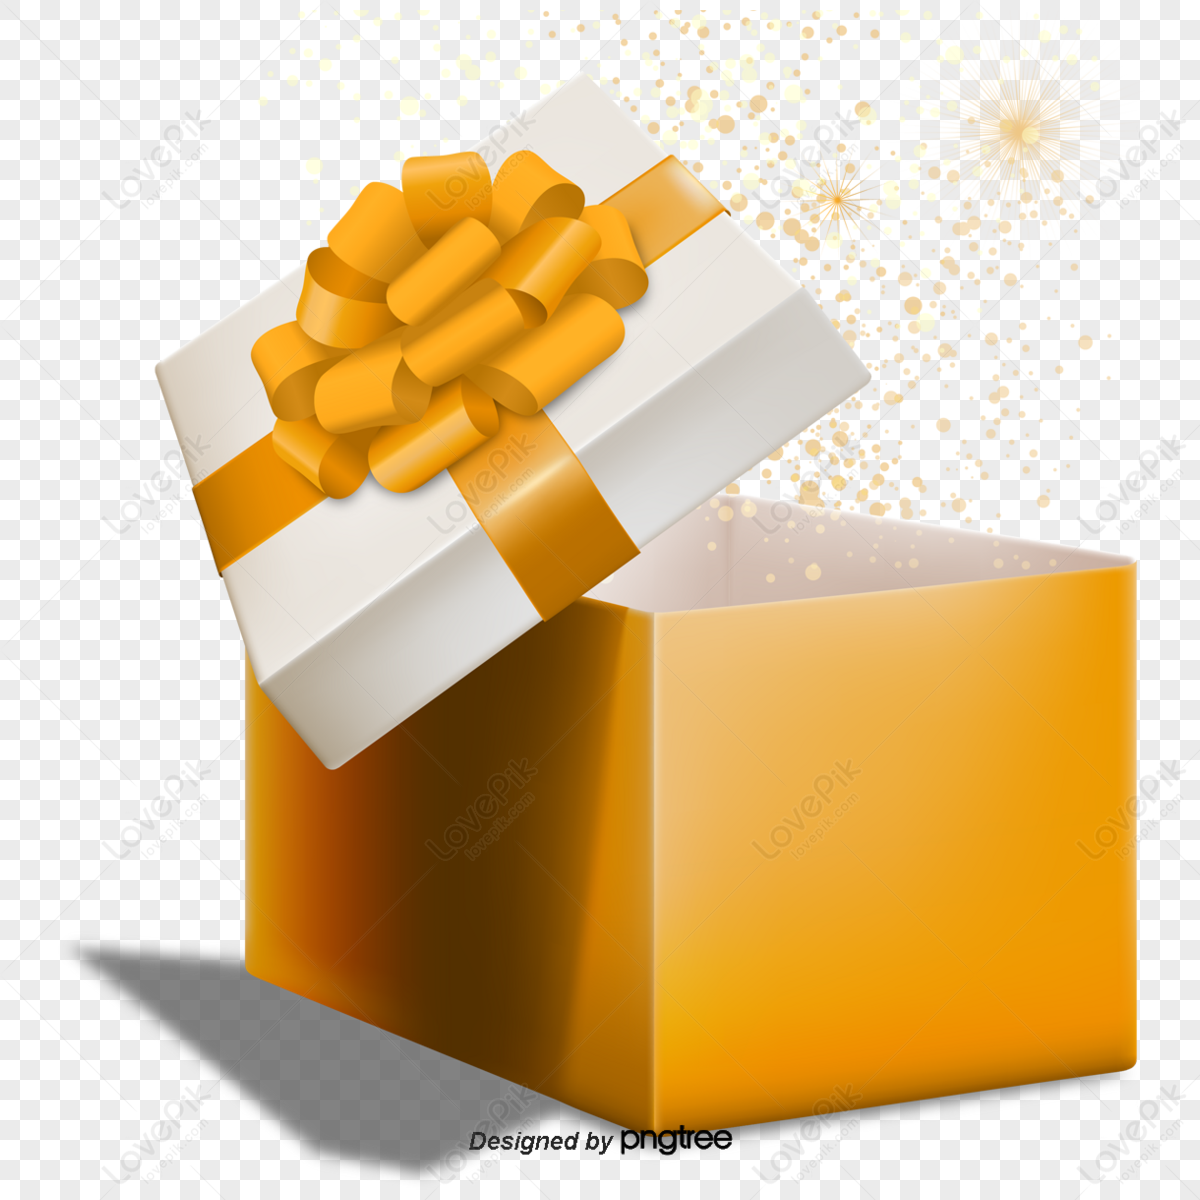 Gift Free PNG Image Download 23 | PNG Images Download | Gift Free PNG Image  Download 23 pictures Download | Gift Free PNG Image Download 23 PNG &  Vector Stock Images | Free png download